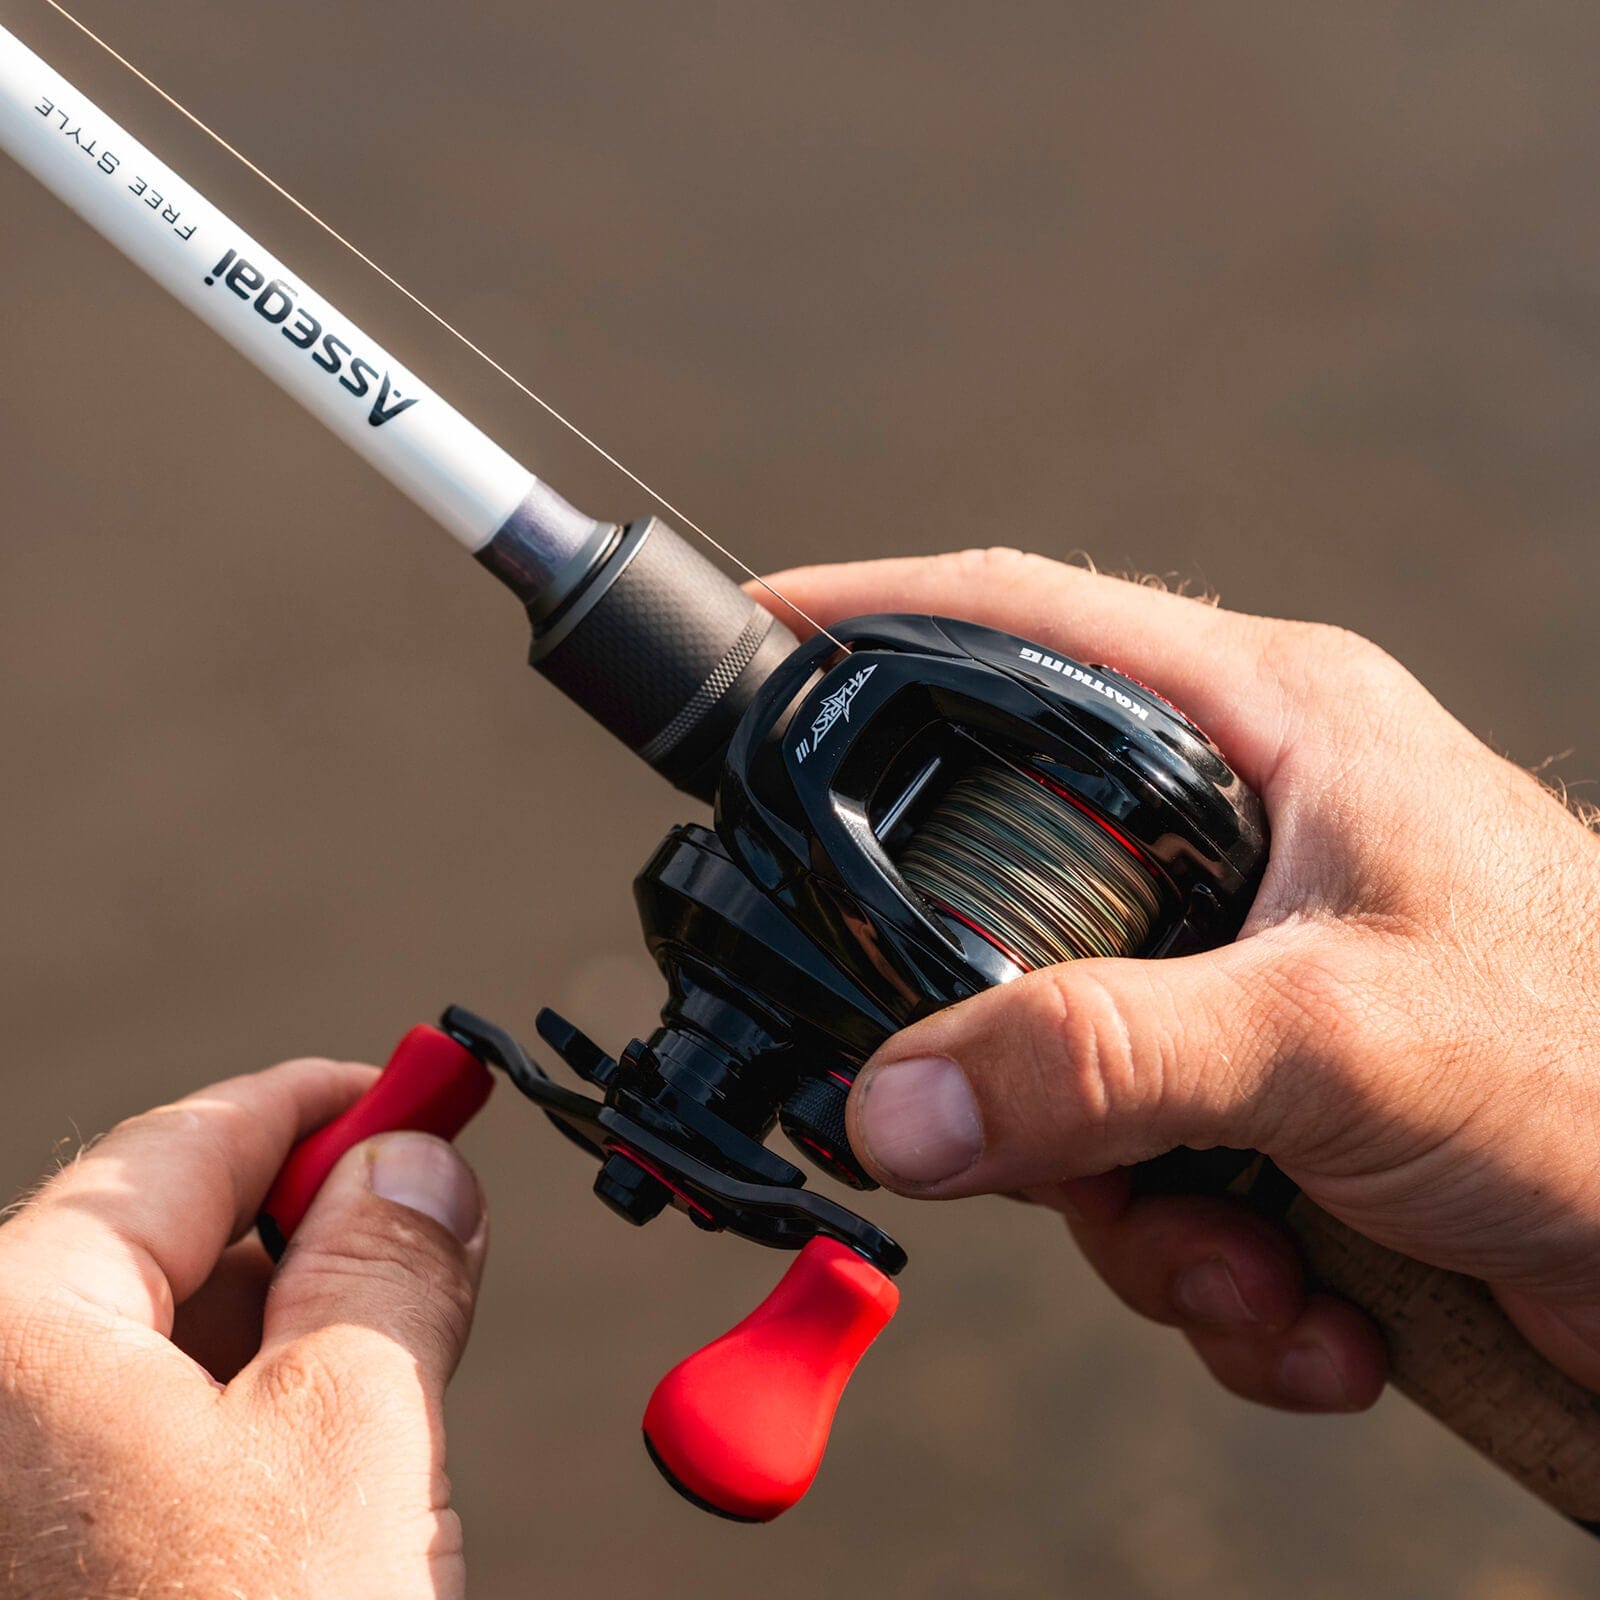 KastKing Sharky III Gold Saltwater Competitor Spinning Combo Max Drag 18KG,  11 Ball Bearings, Powerful Fishing Tool For Pike And Bass From Blacktiger,  $112.57